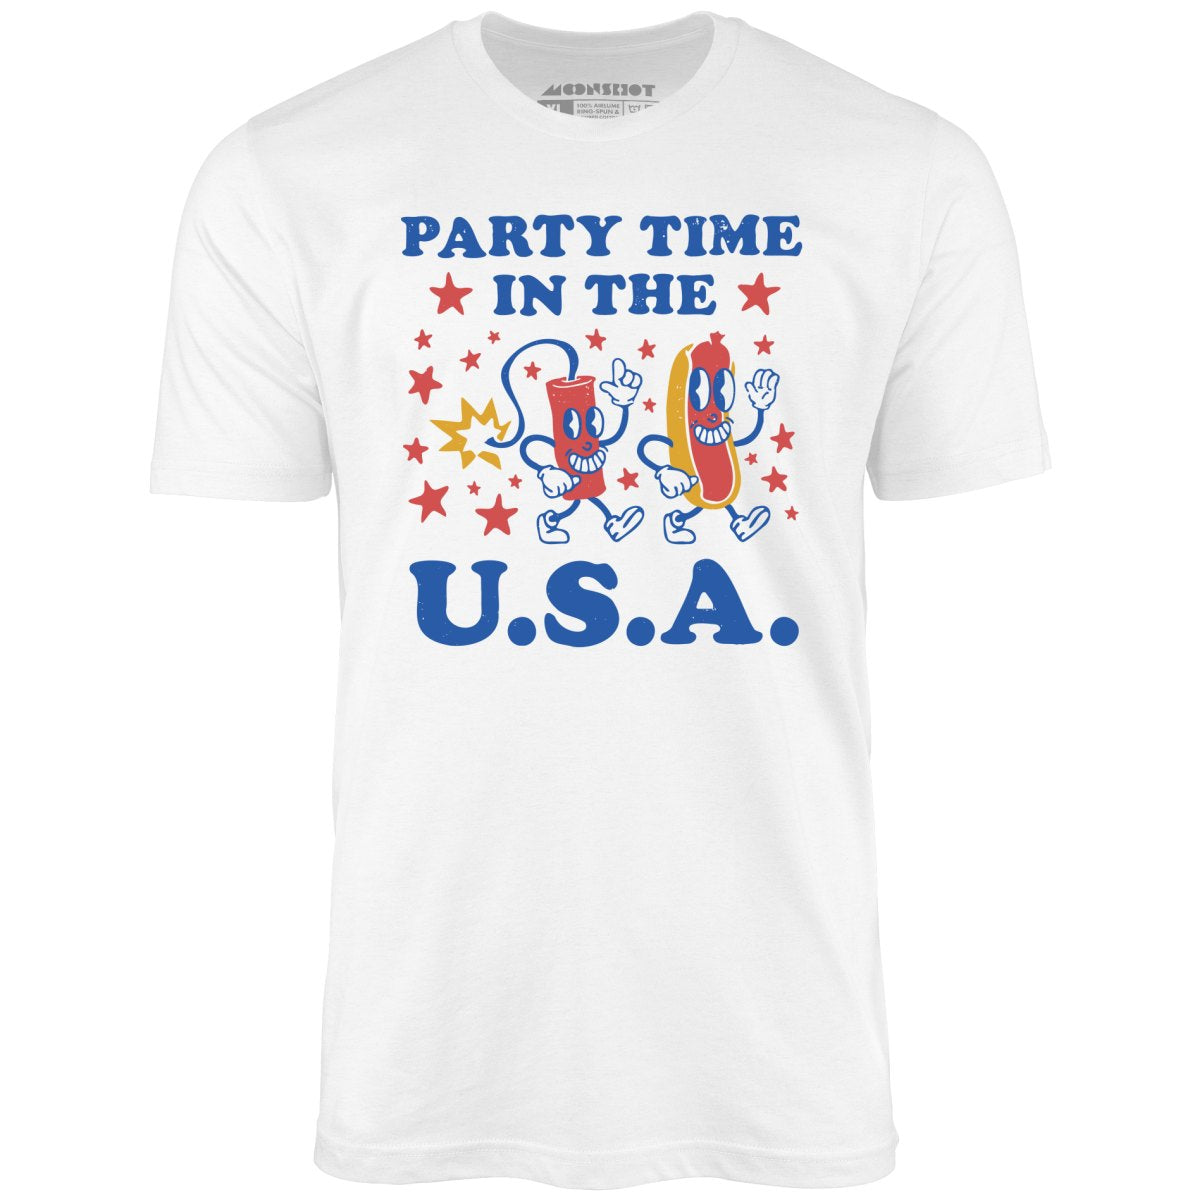 Party Time in The U.S.A. - Unisex T-Shirt